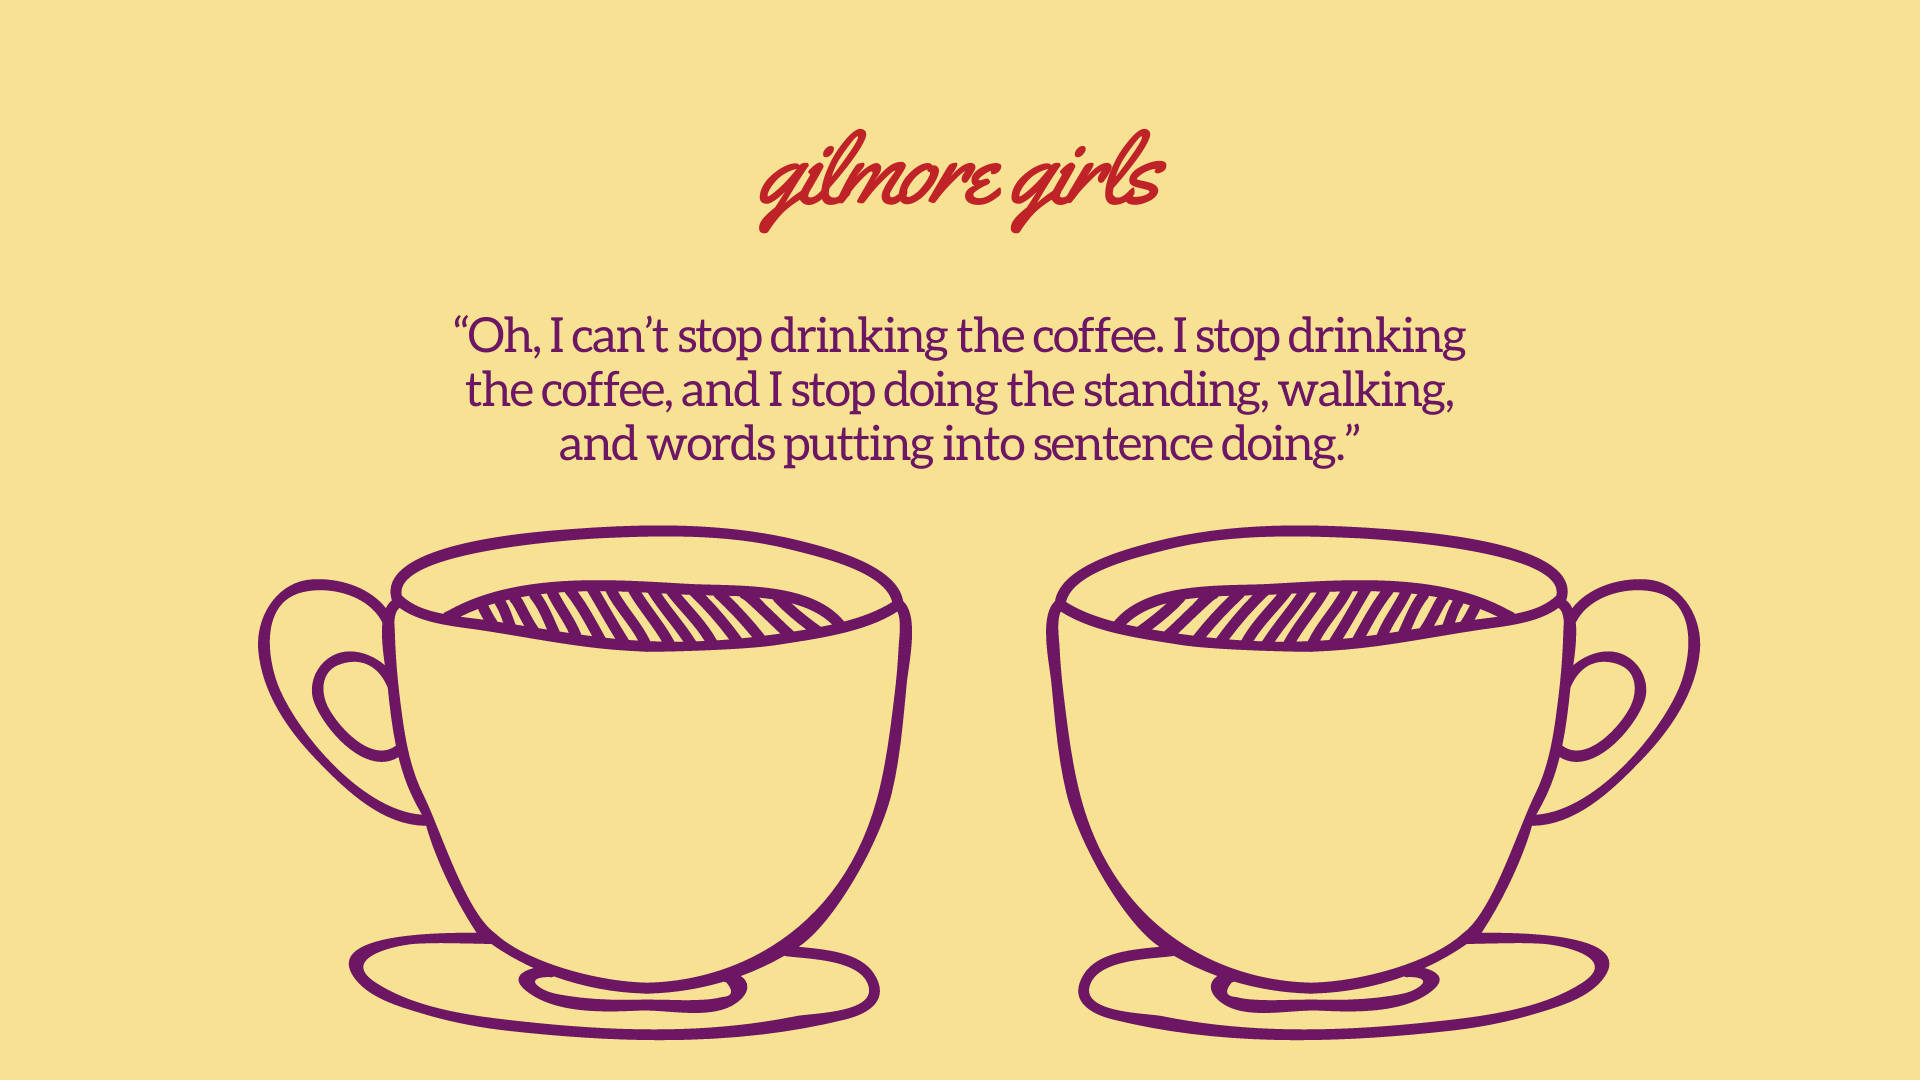 Gilmore Girls Iconic Coffee Quote Wallpaper